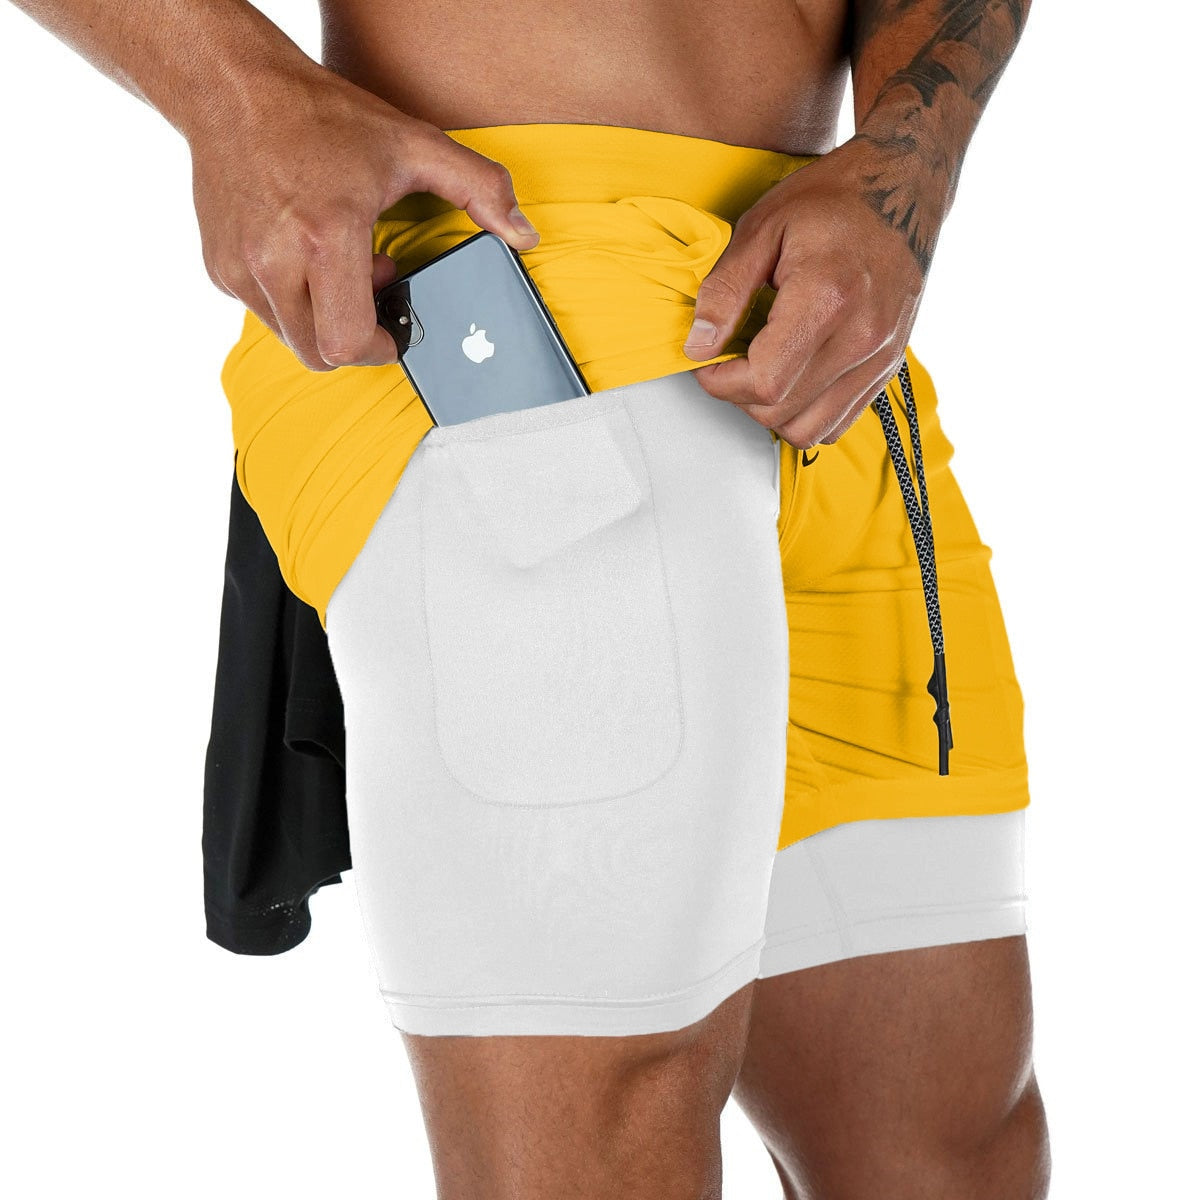 Colorful Fitness Shorts With Hidden Pocket